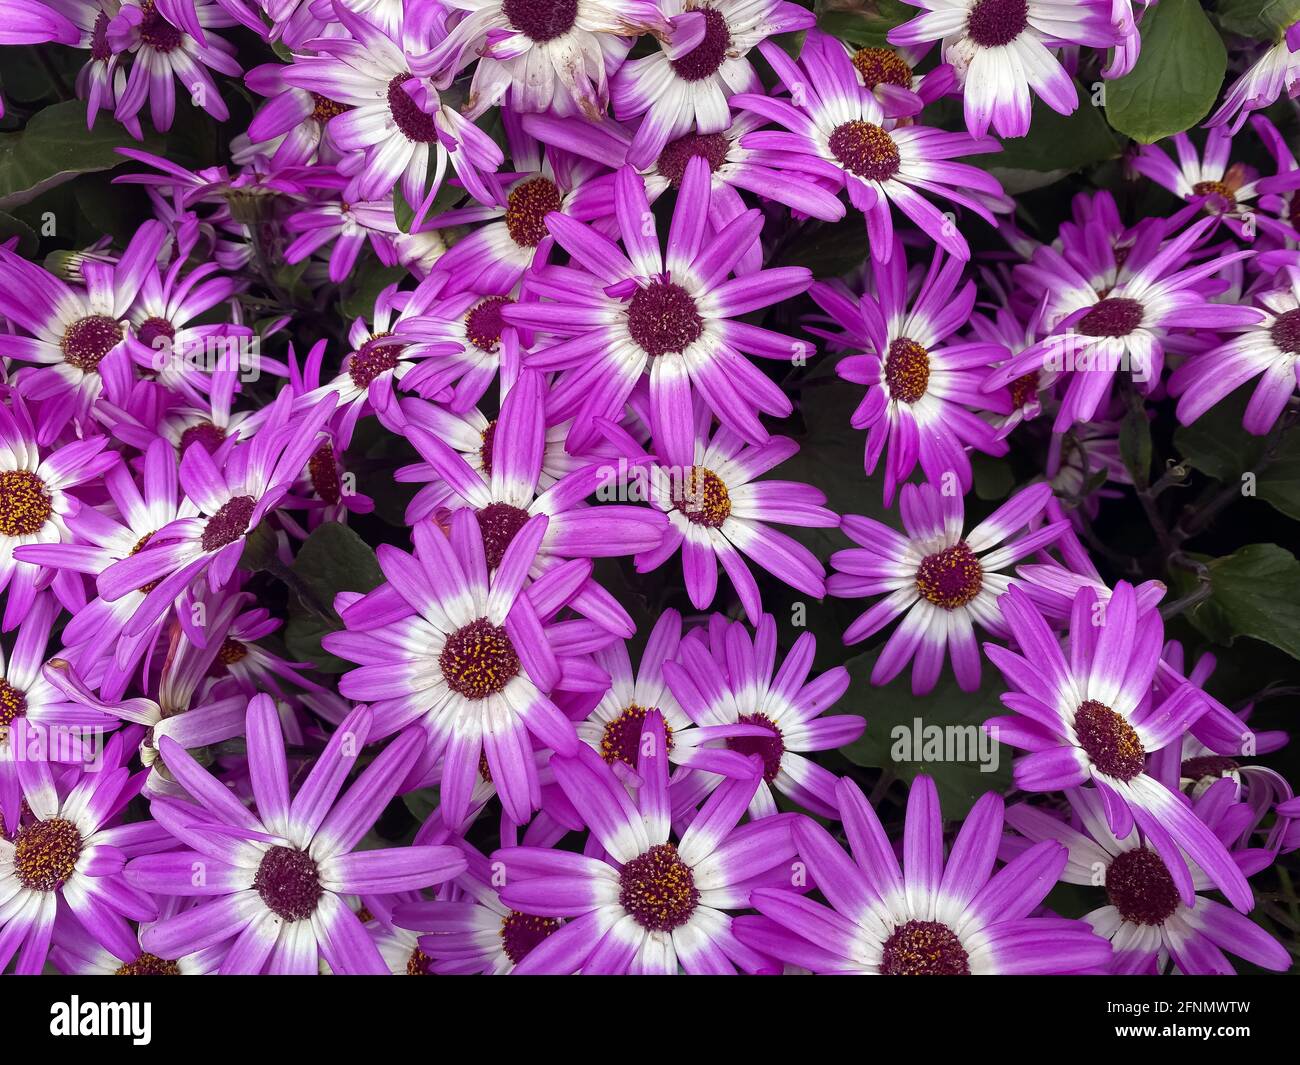 Top view on many isolated white purple pink pericallis flowers in garden center Stock Photo